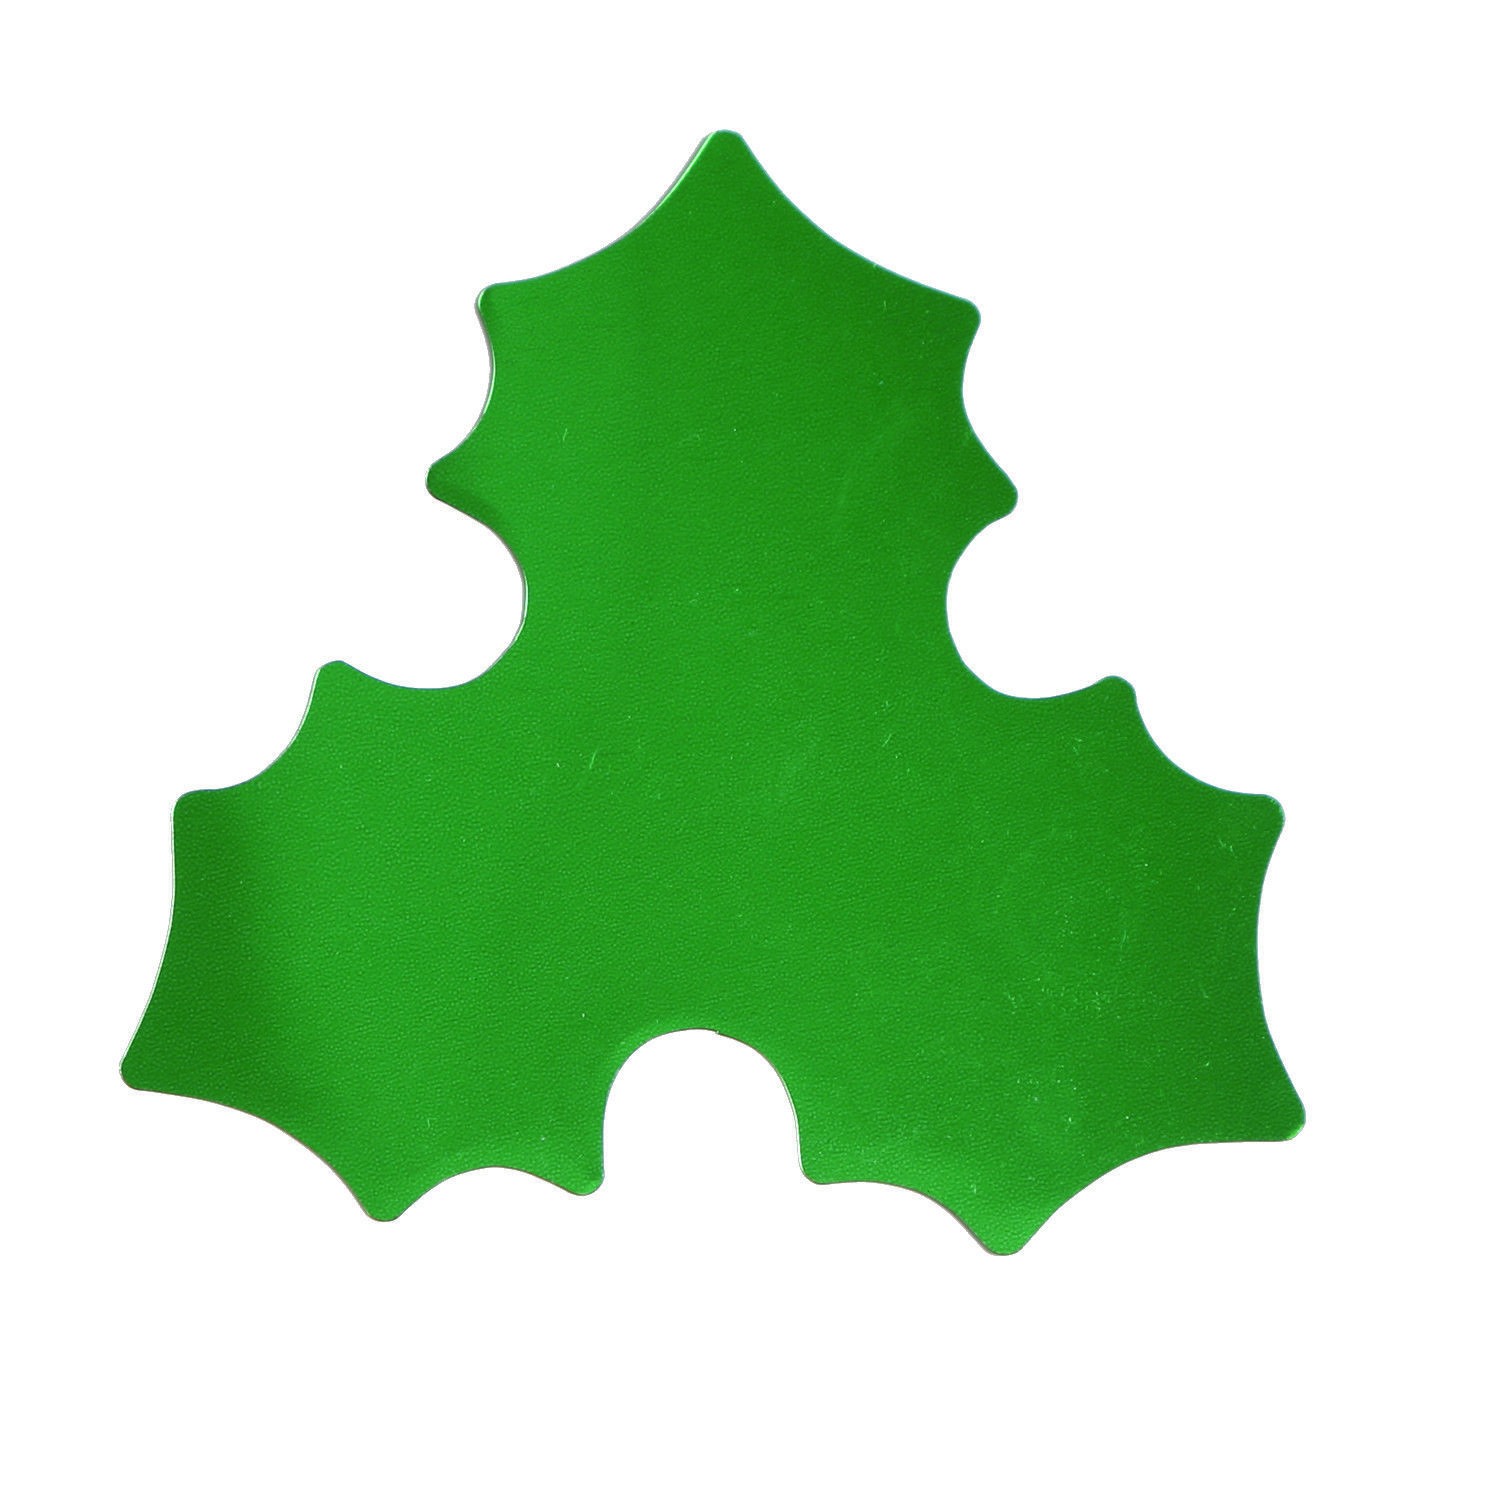 Primary image for Holy Leaf Cutouts Plastic Shapes Confetti Die Cut 15 pcs  FREE SHIPPING